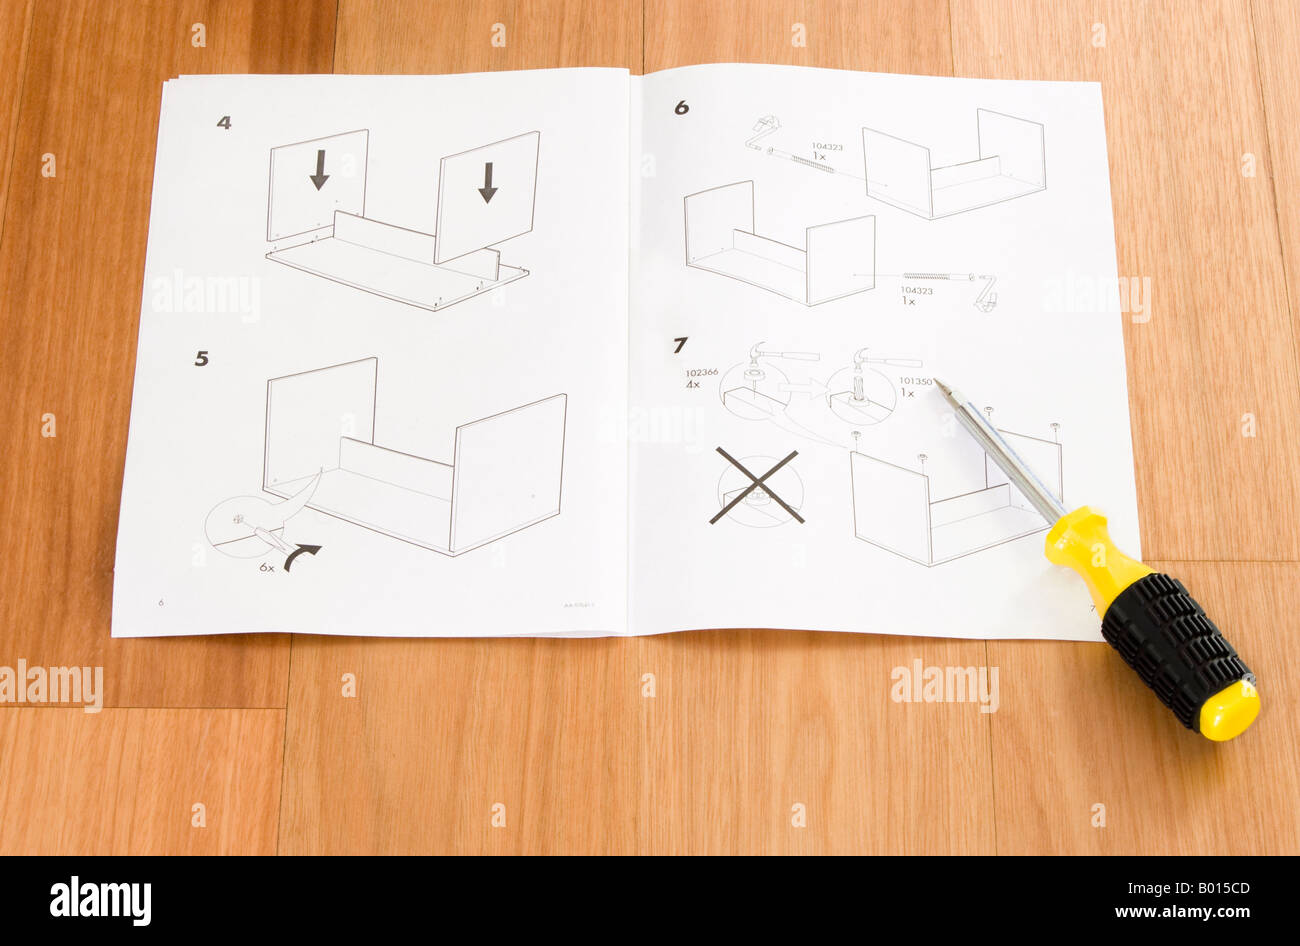 Self Assembly Ikea Furniture Instructions And Screwdriver Stock